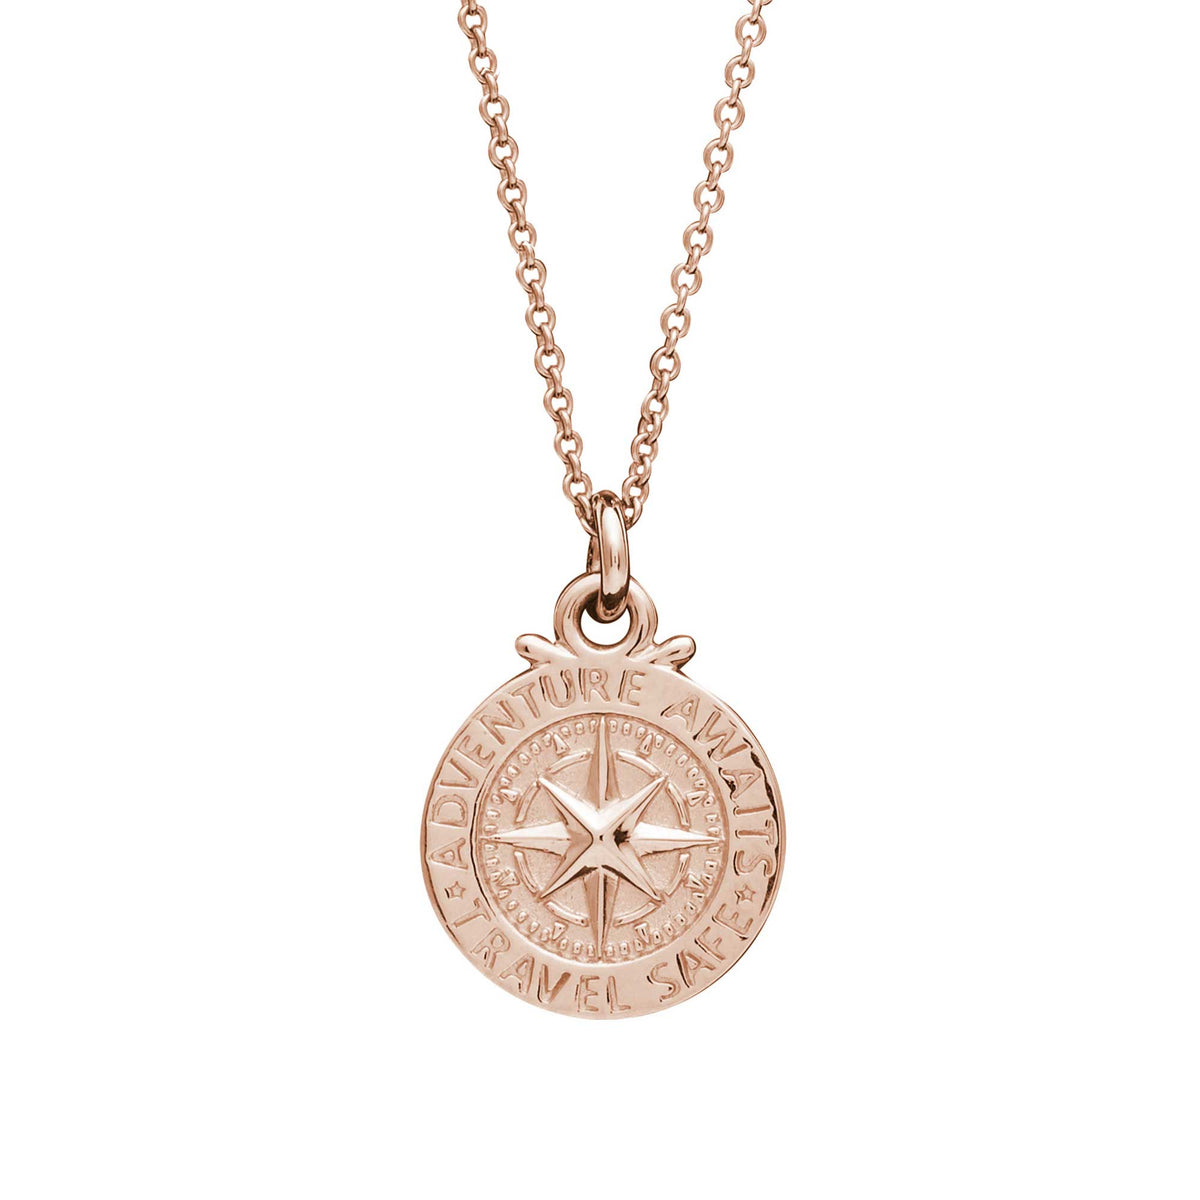 Solid rose gold compass non religious saint christopher alternative by Off The Map Jewellery